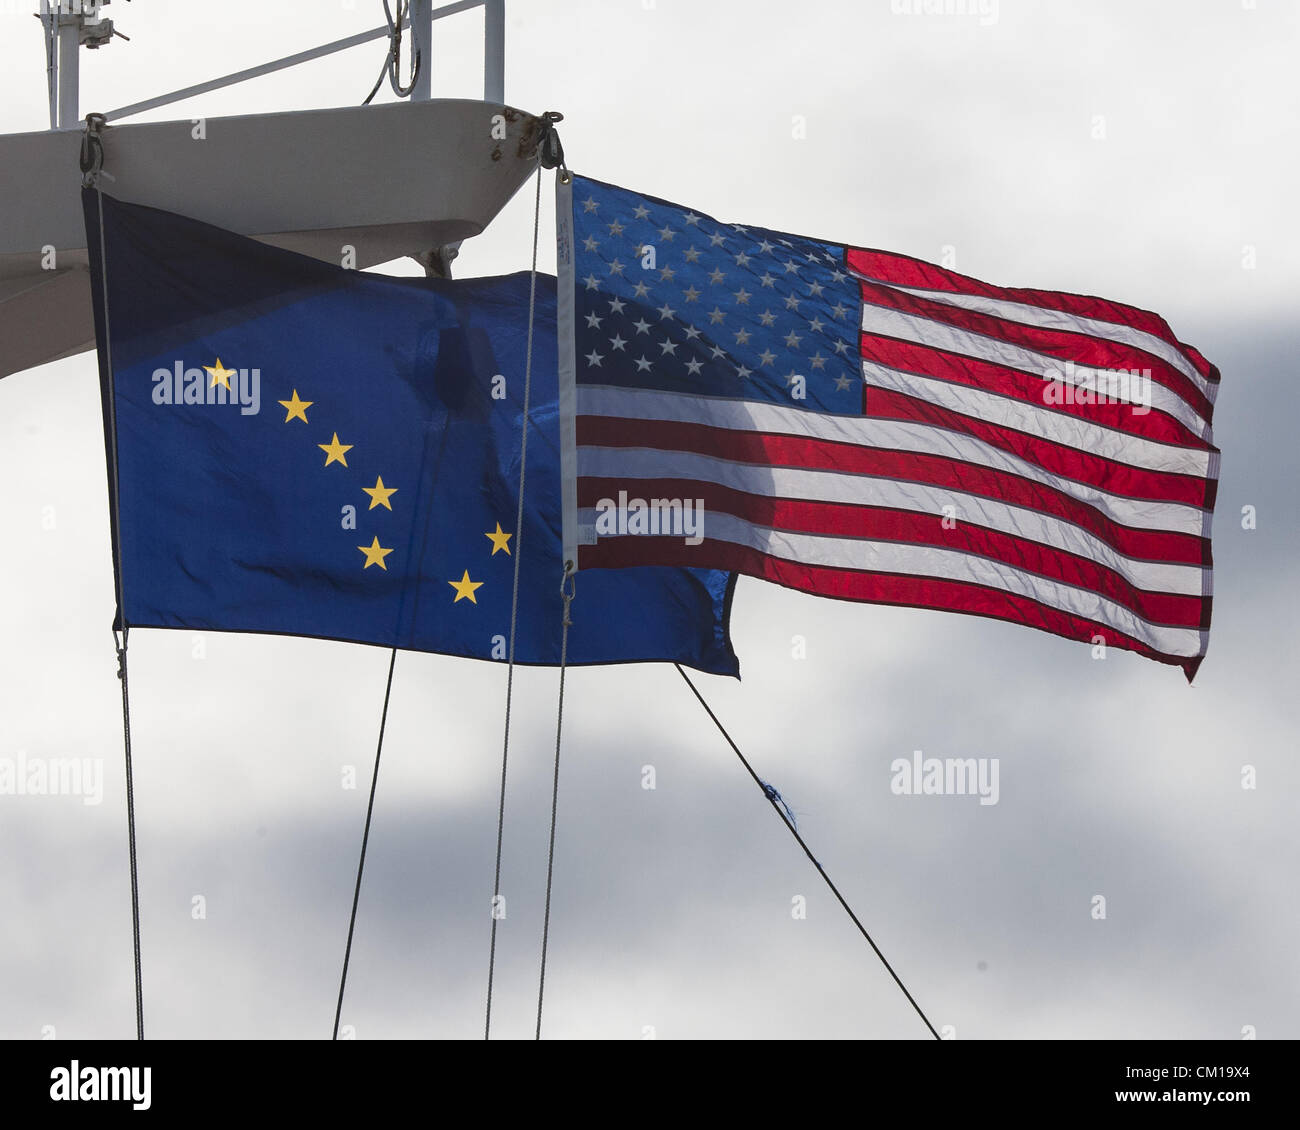 July 4, 2012 - Haines Borough, Alaska, US - The flags of the United States of America and the State of Alaska fly from the mast of the MS Zaandam of the Holland America Line anchored in Haines, Alaska. (Credit Image: © Arnold Drapkin/ZUMAPRESS.com) Stock Photo